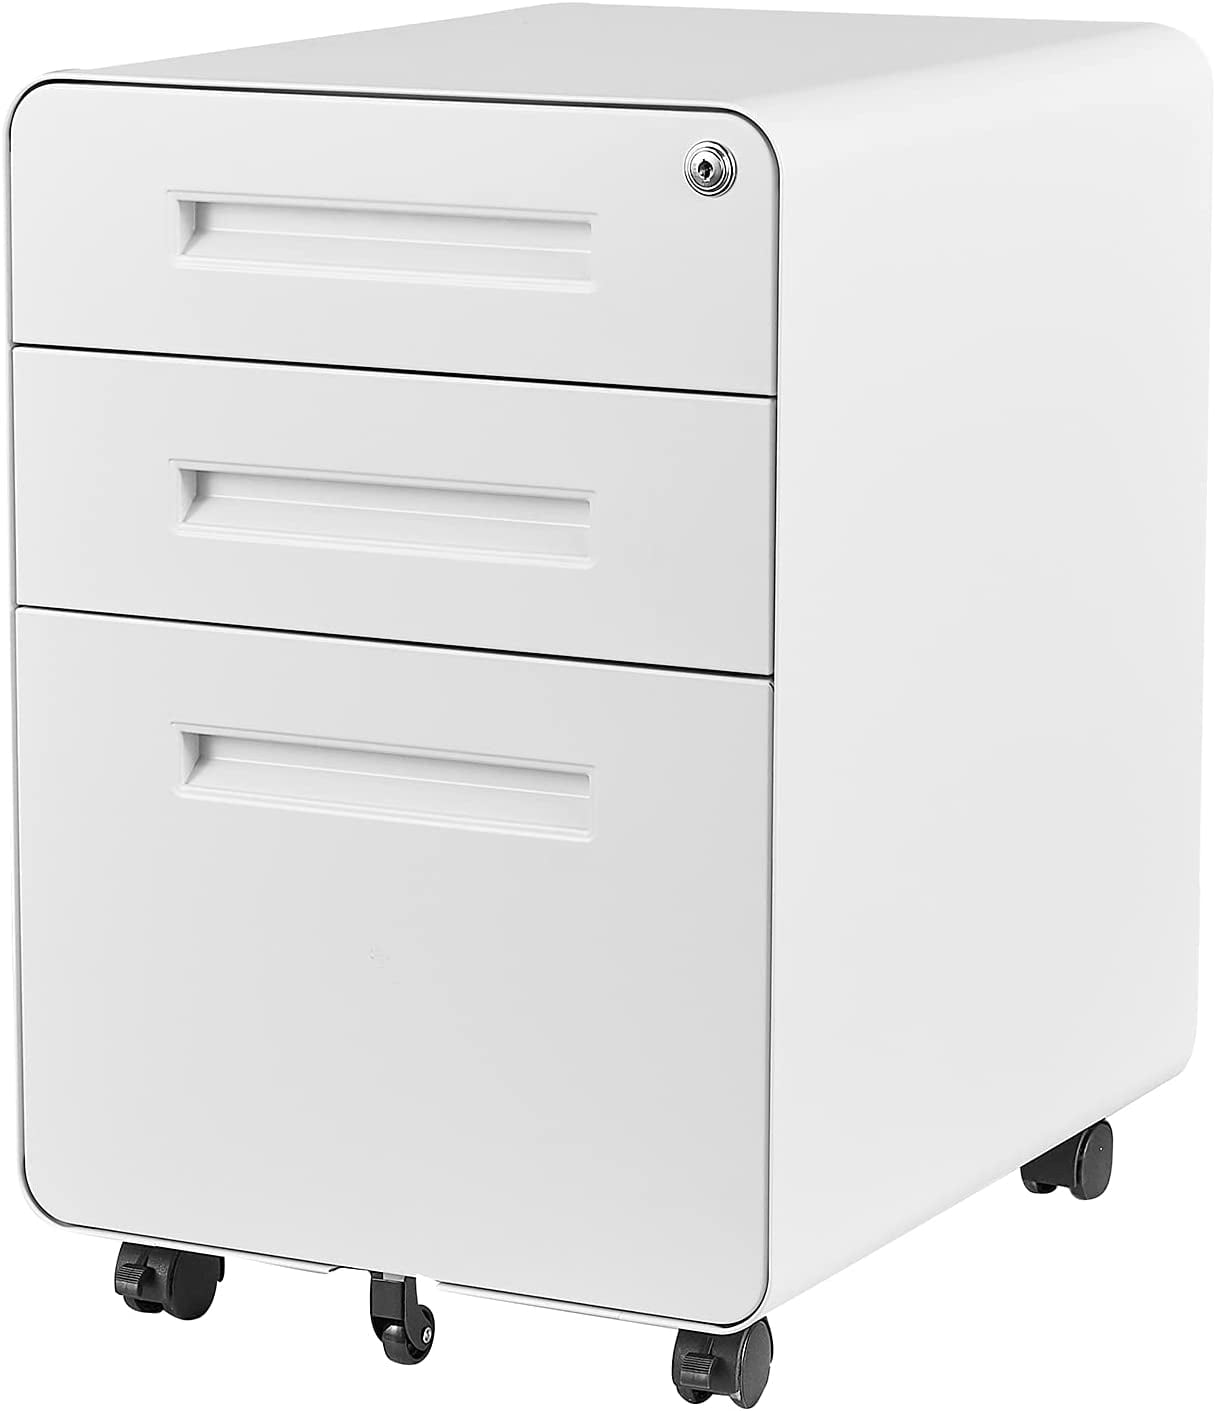 MIIIKO 3 Drawer File Cabinet Modern Small Rolling Cabinet with Lock ...